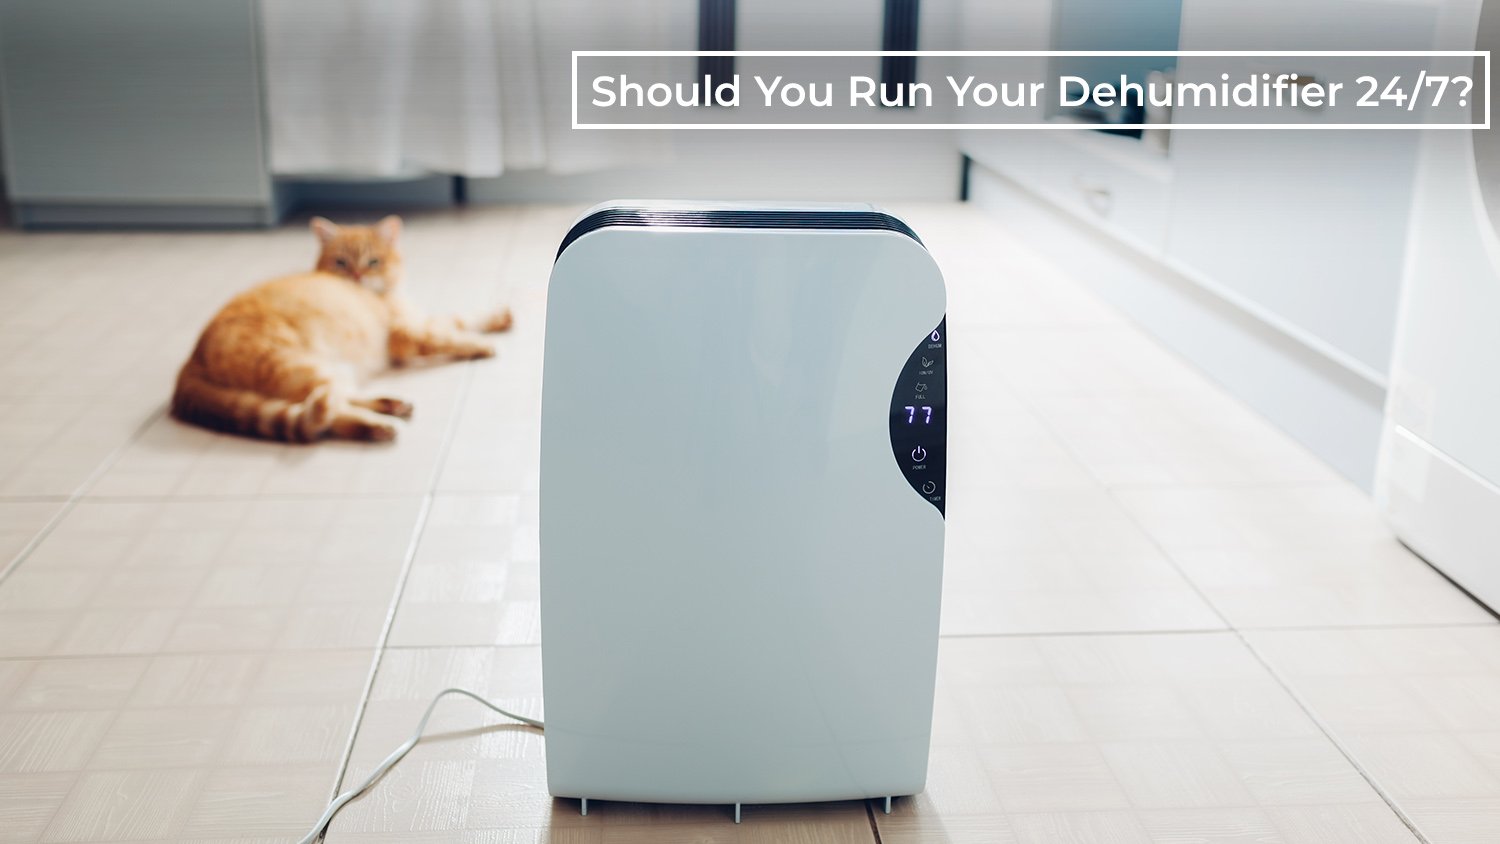 Should Your Dehumidifier Run All the Time? An In-Depth Analysis